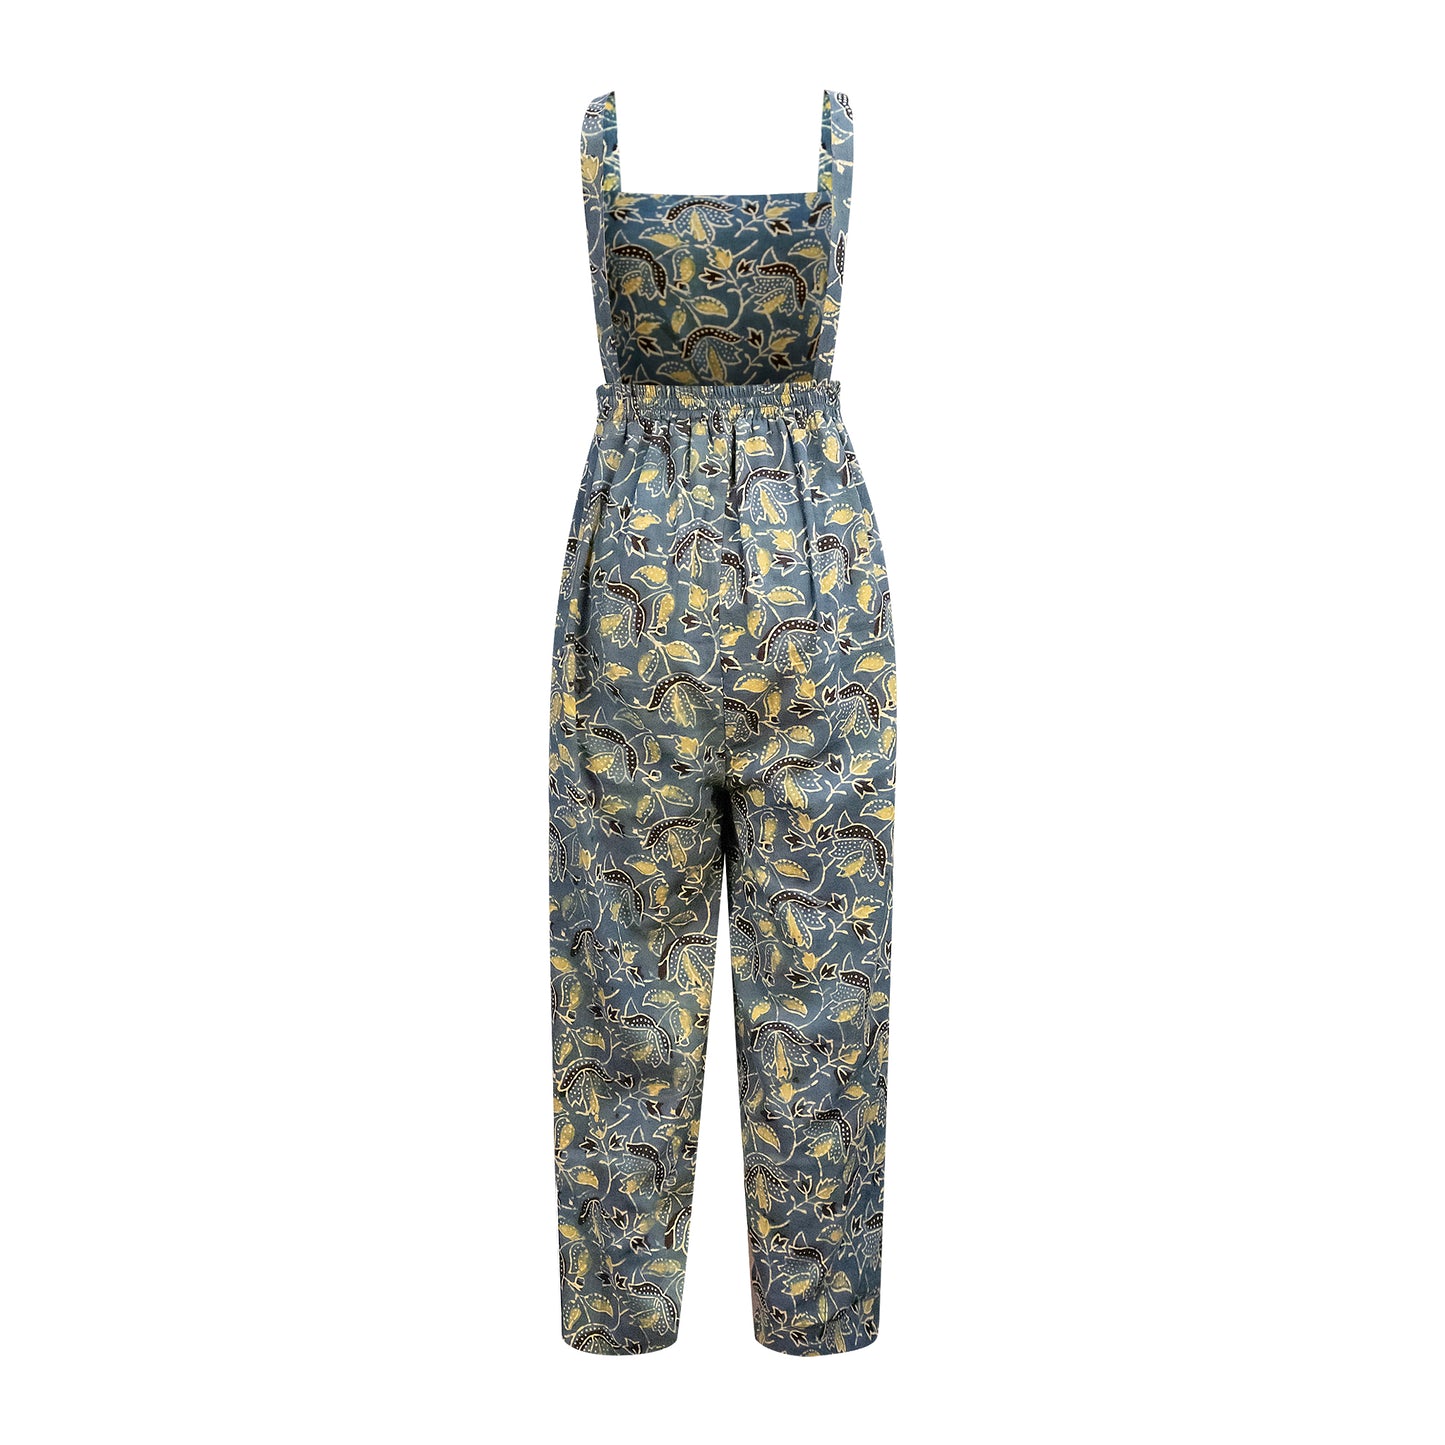 JEAL overalls